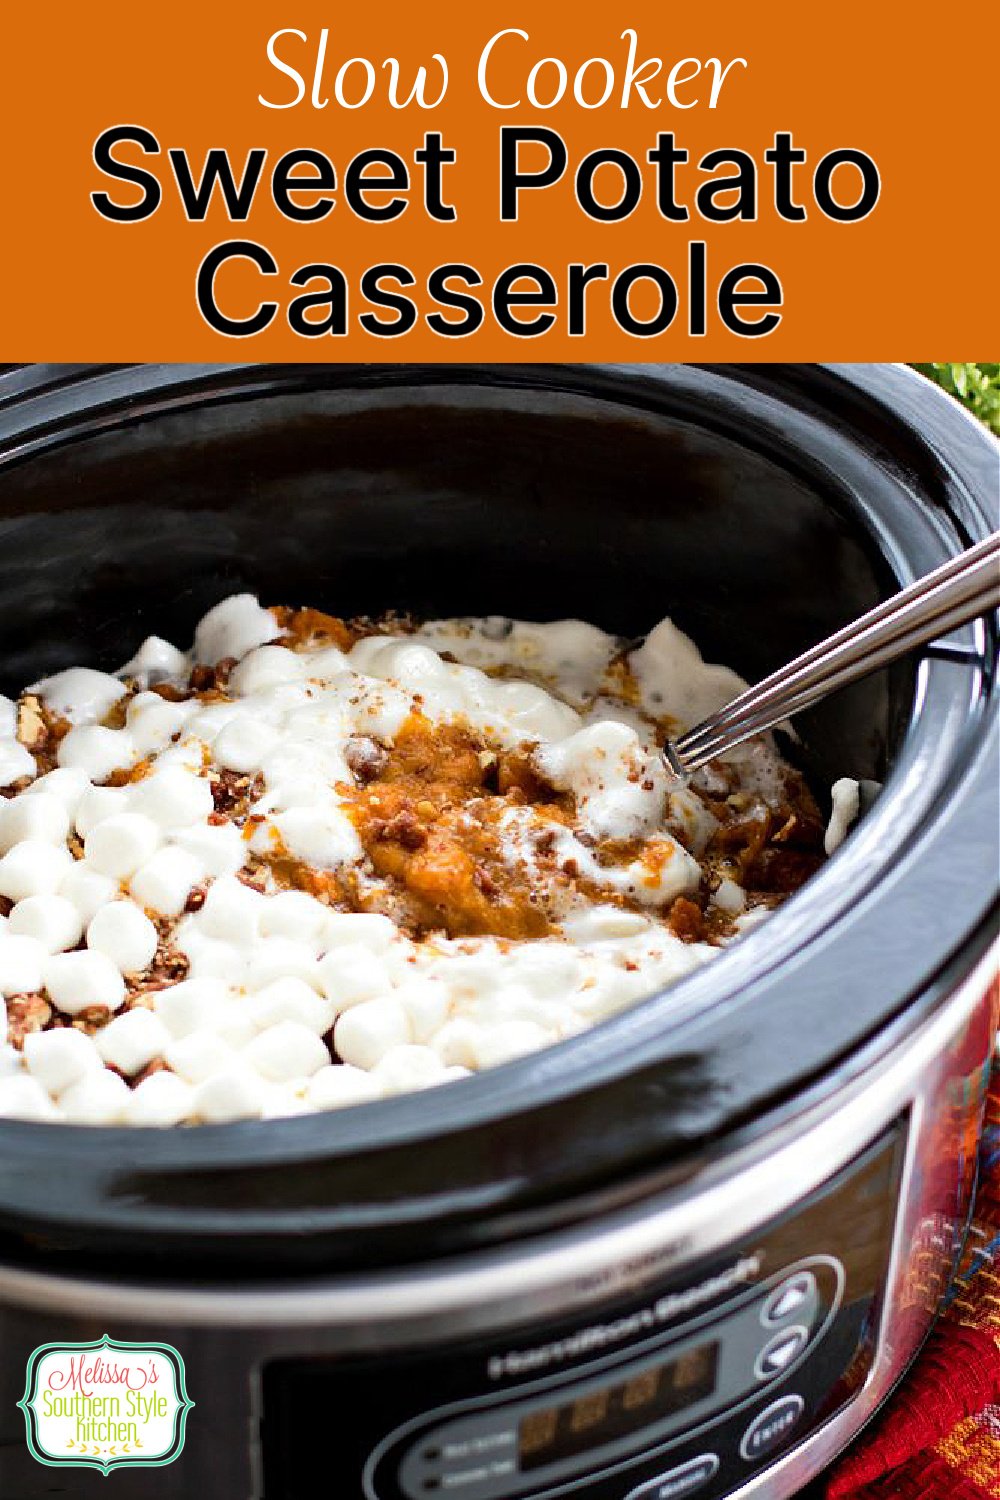 Free-up oven space and make this insanely delicious Sweet Potato Casserole in your slow cooker! #sweetpotatocasserole #sweetpotatoes #crockpotrecipes #slowcookedsweetpotatocasserole #casserolerecipes #thanksgivingrecipes #potatorecipes #southernfood #southernrecipes #holidaysidedishes